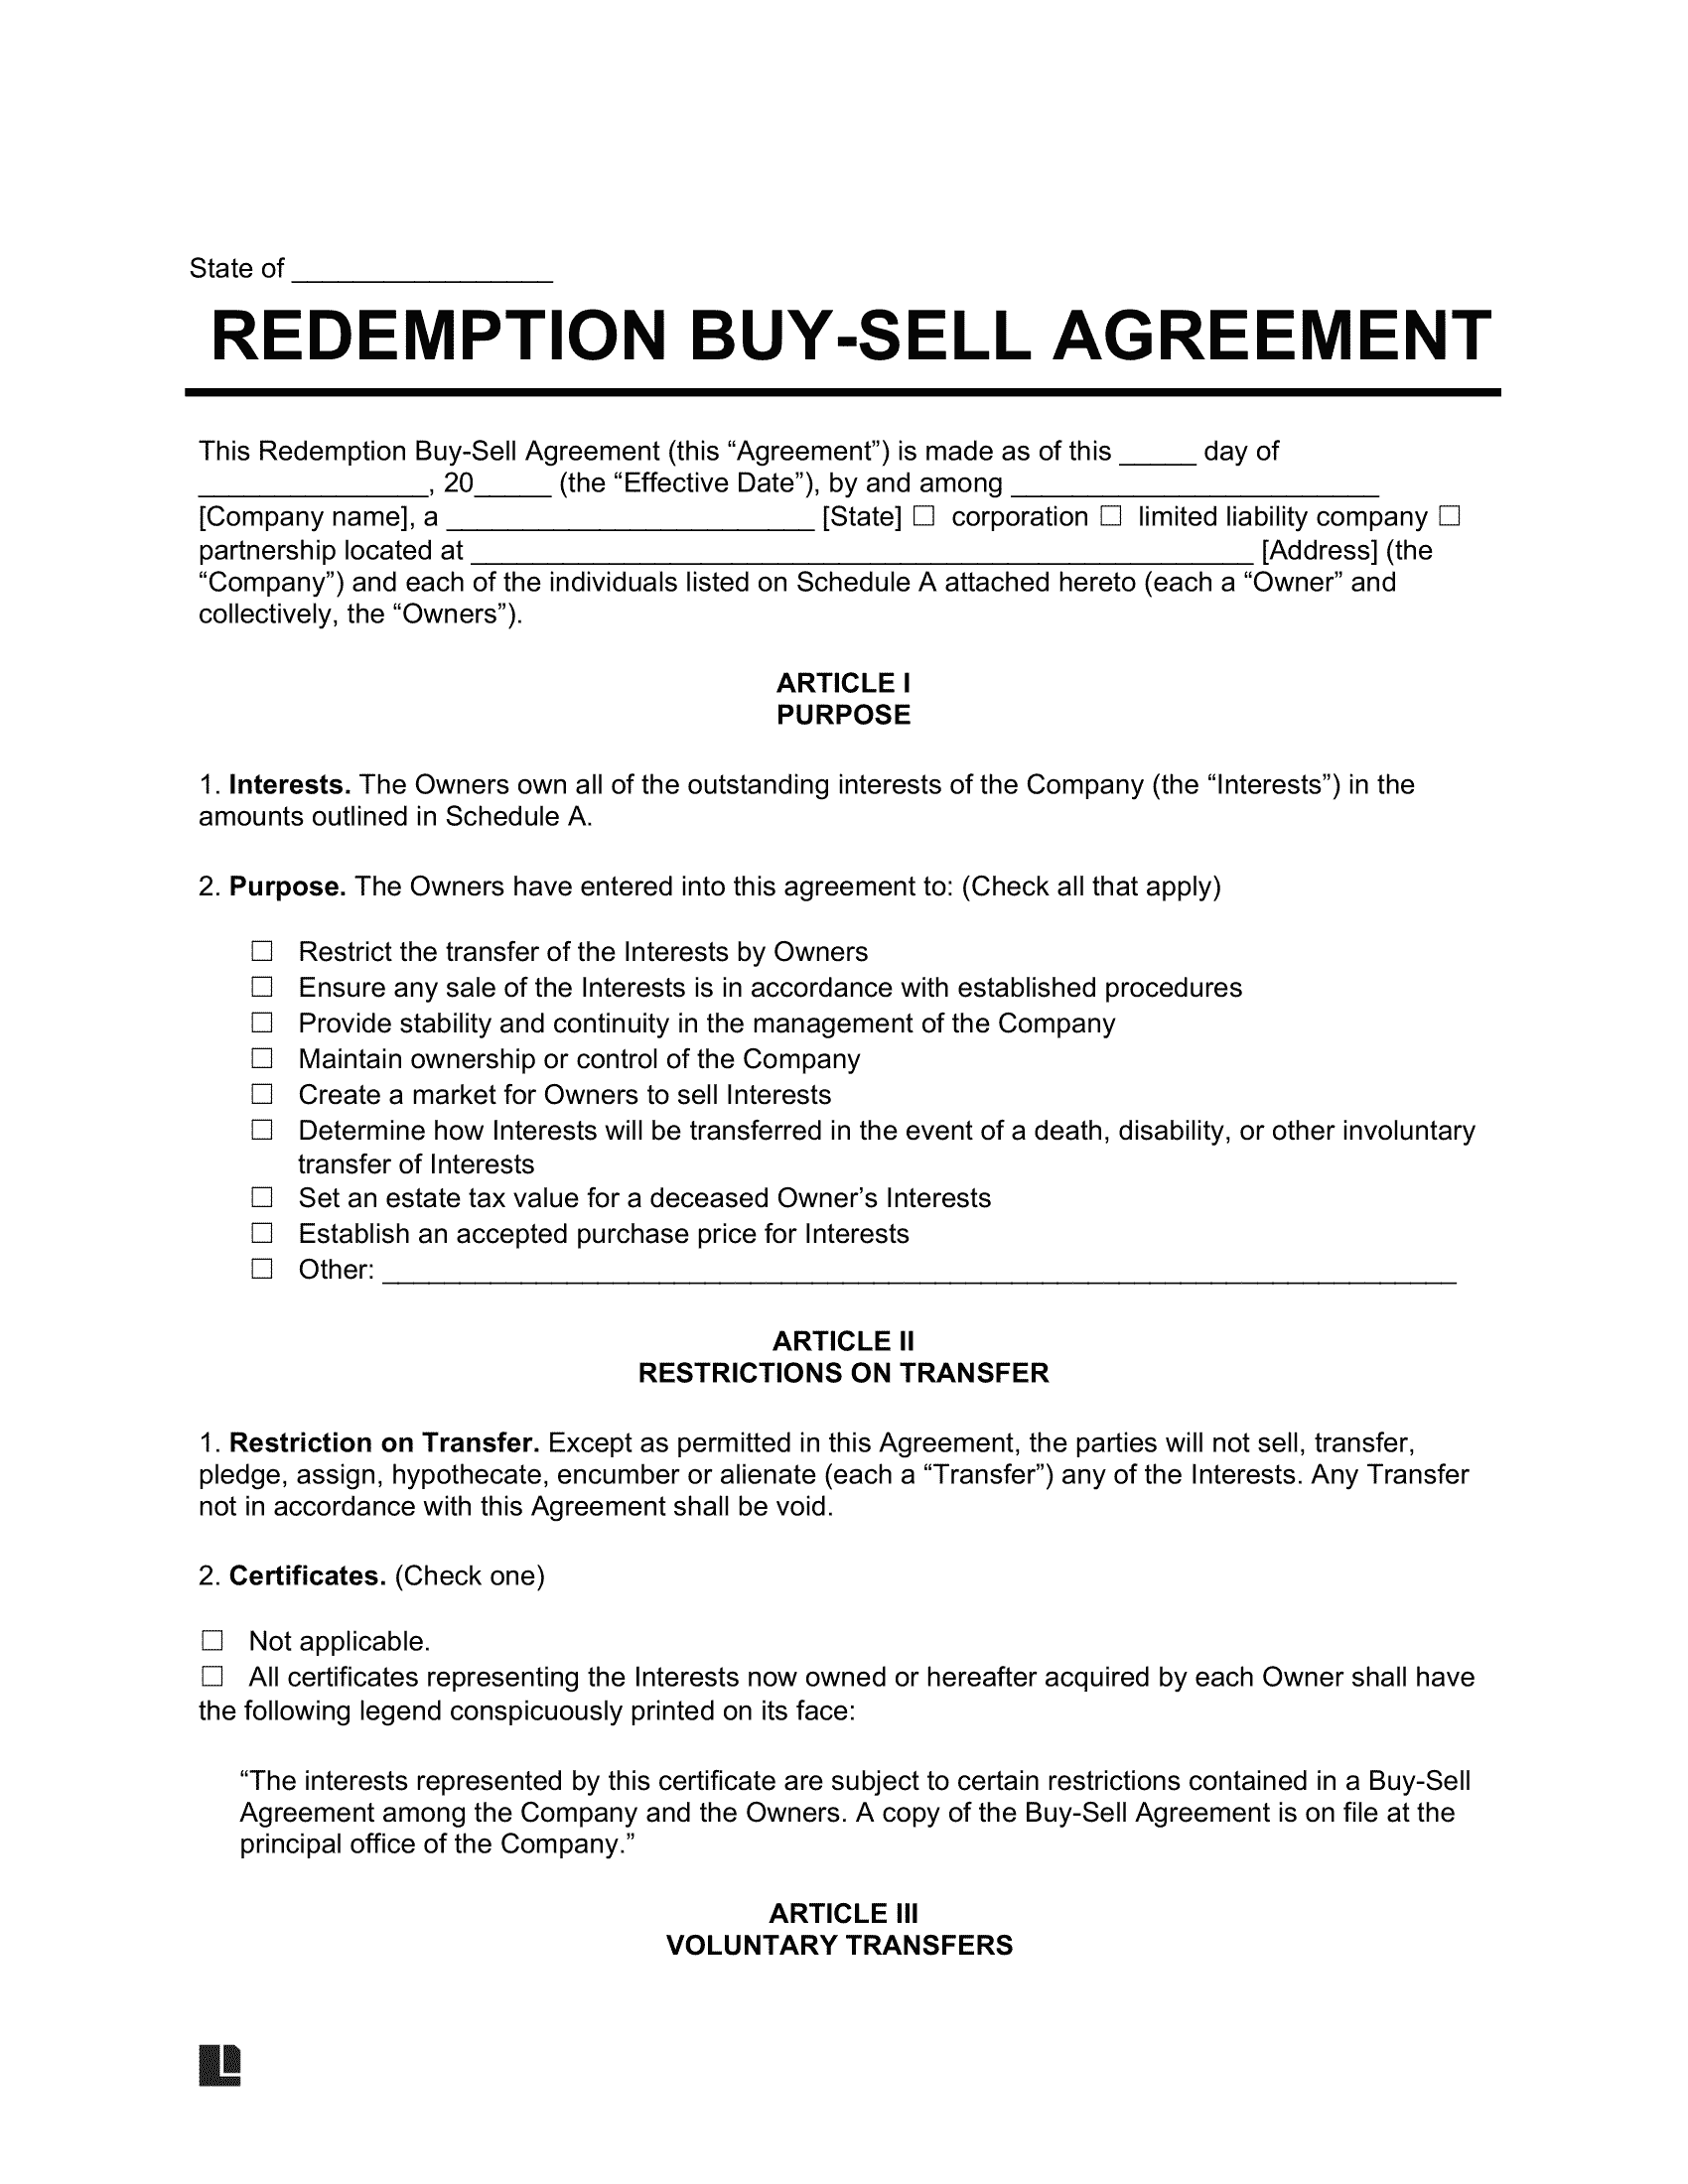 Redemption Buy-Sell Agreement